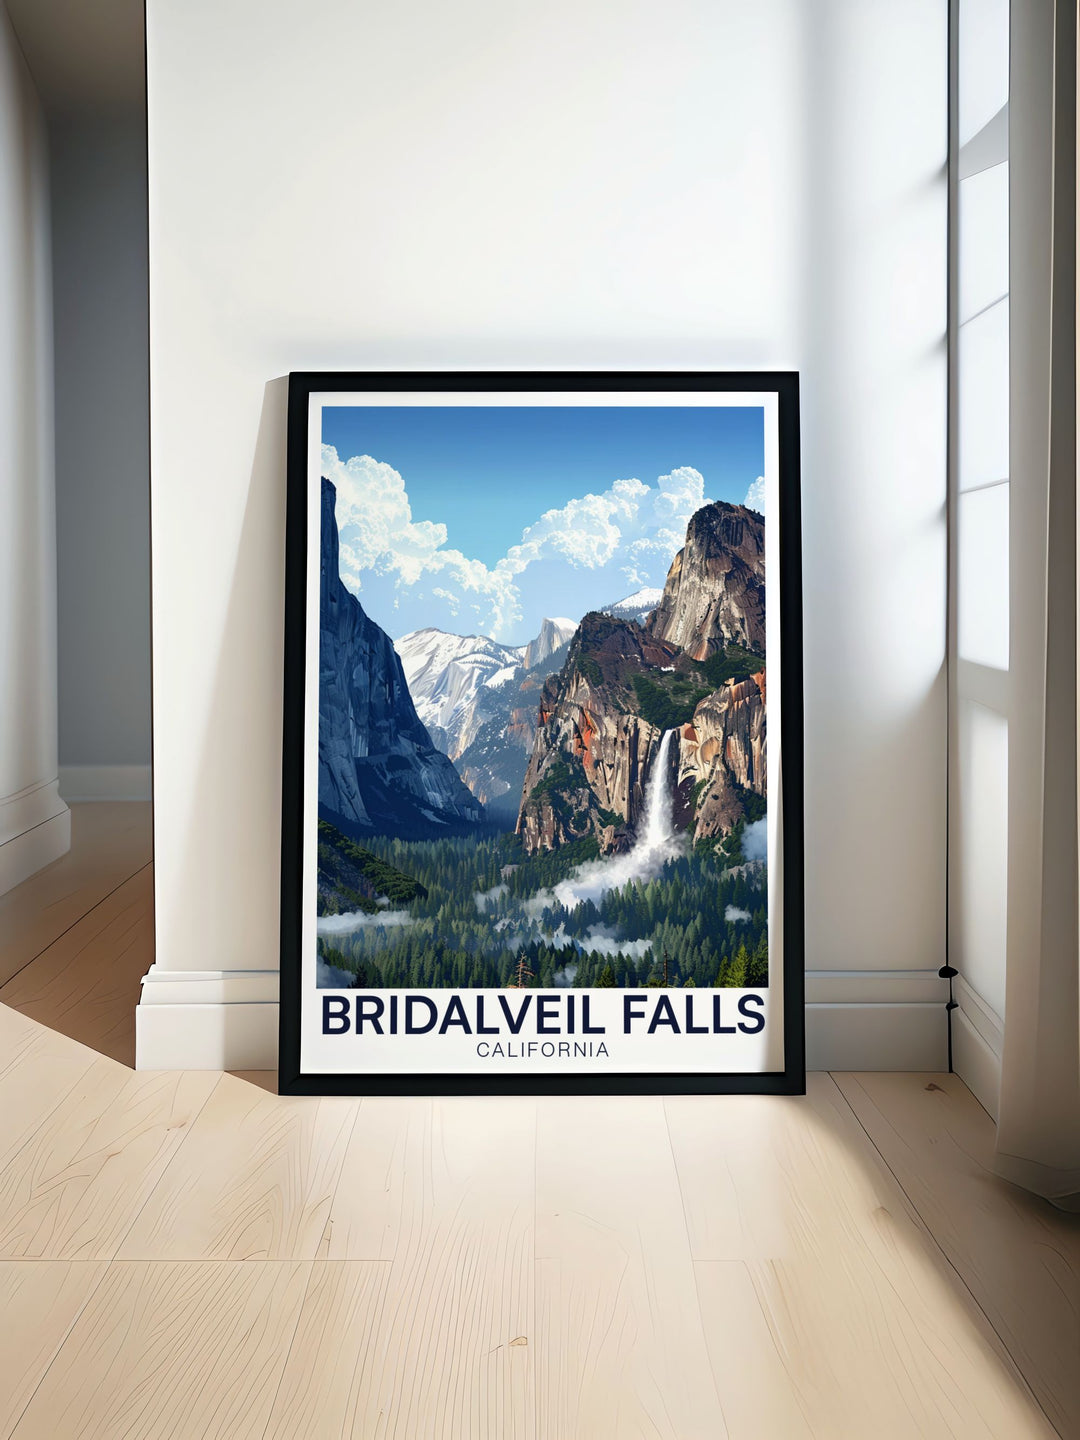 View from Tunnelview poster capturing the stunning Bridalveil Falls in Yosemite National Park perfect for California travel enthusiasts and nature lovers. This California print showcases the beauty of one of the states most iconic landmarks in vibrant detail ideal for home decor.